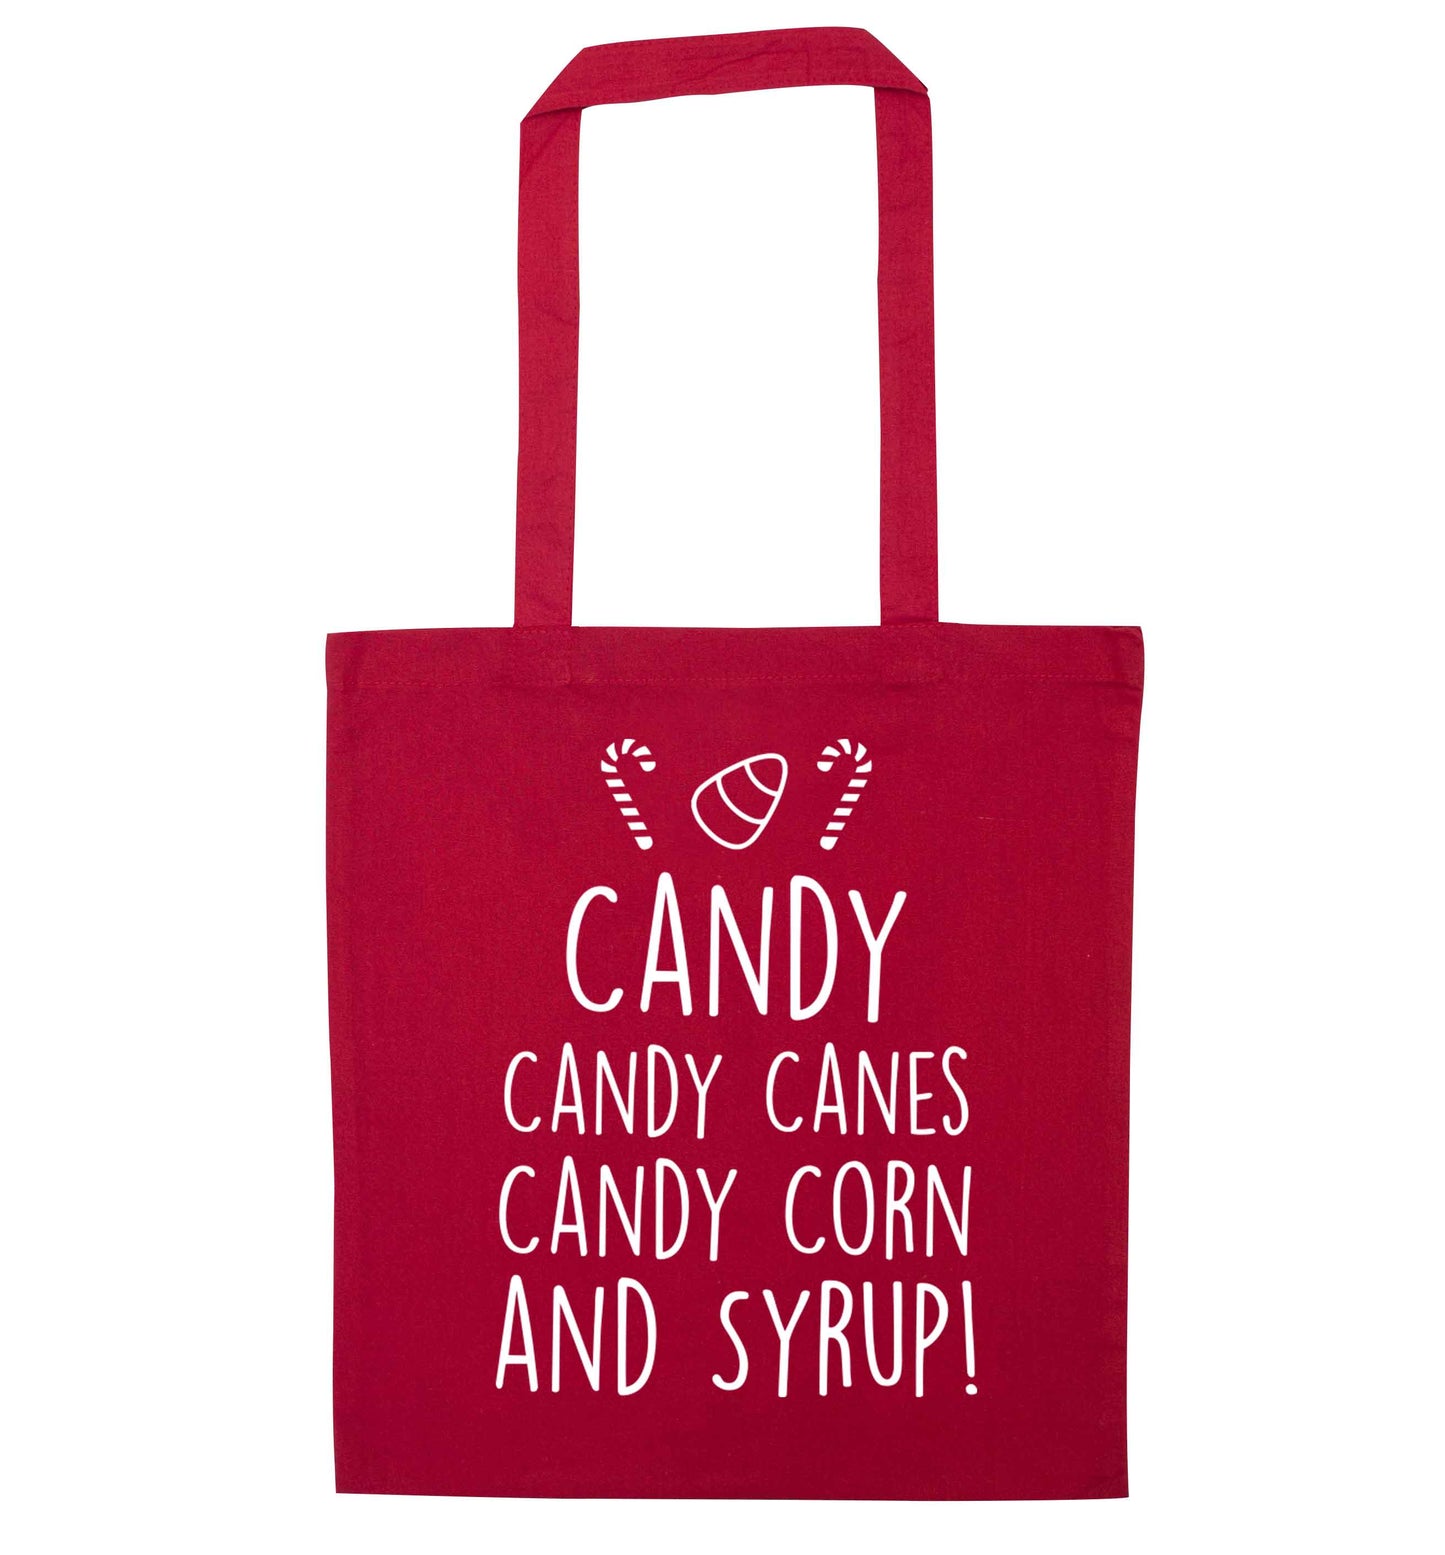 Candy Canes Candy Corns red tote bag